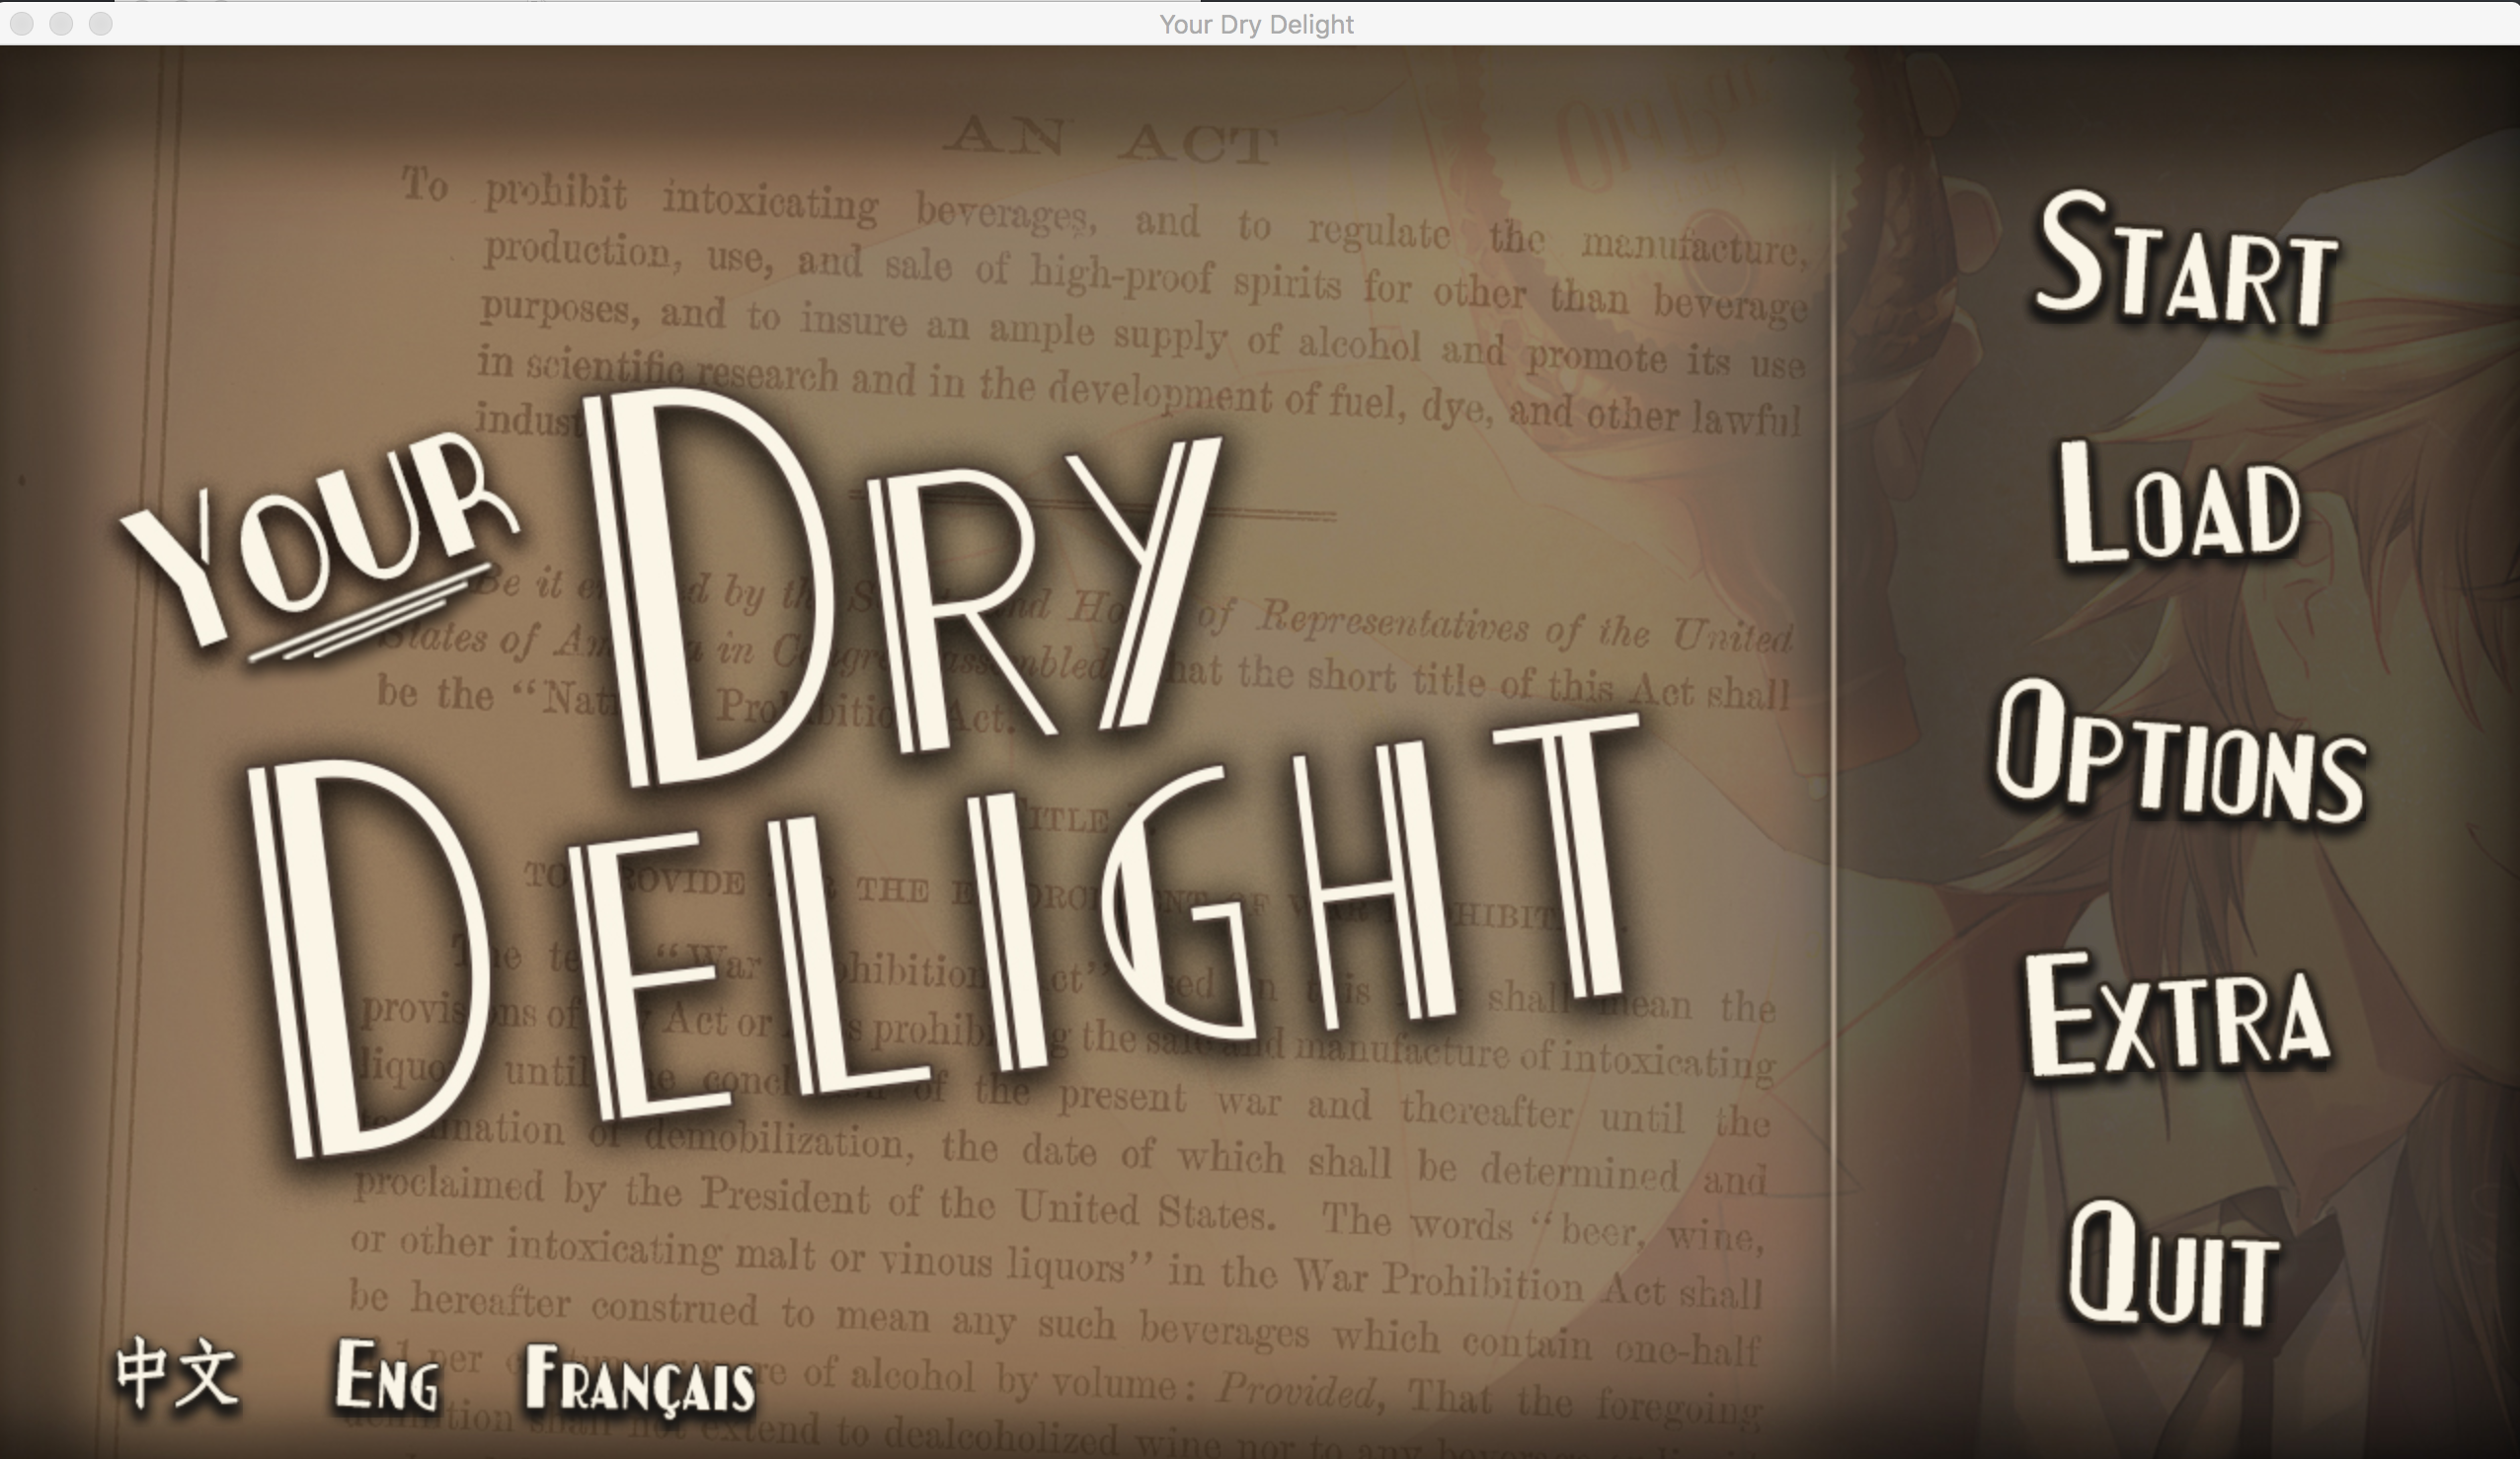 English main menu of Your Dry Delight